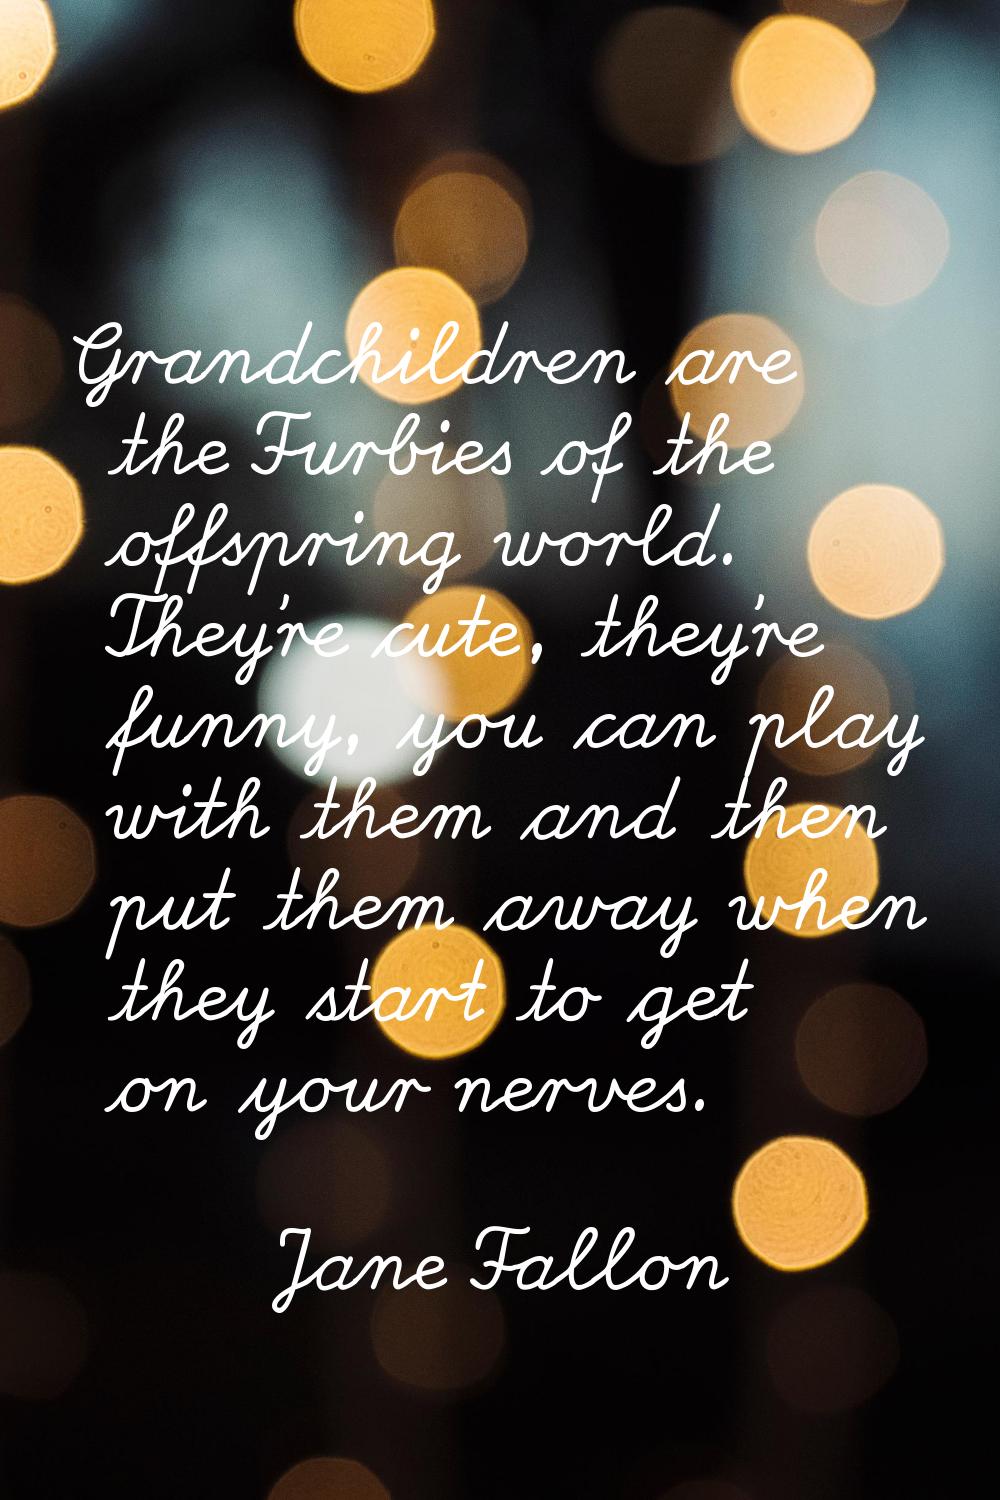 Grandchildren are the Furbies of the offspring world. They're cute, they're funny, you can play wit